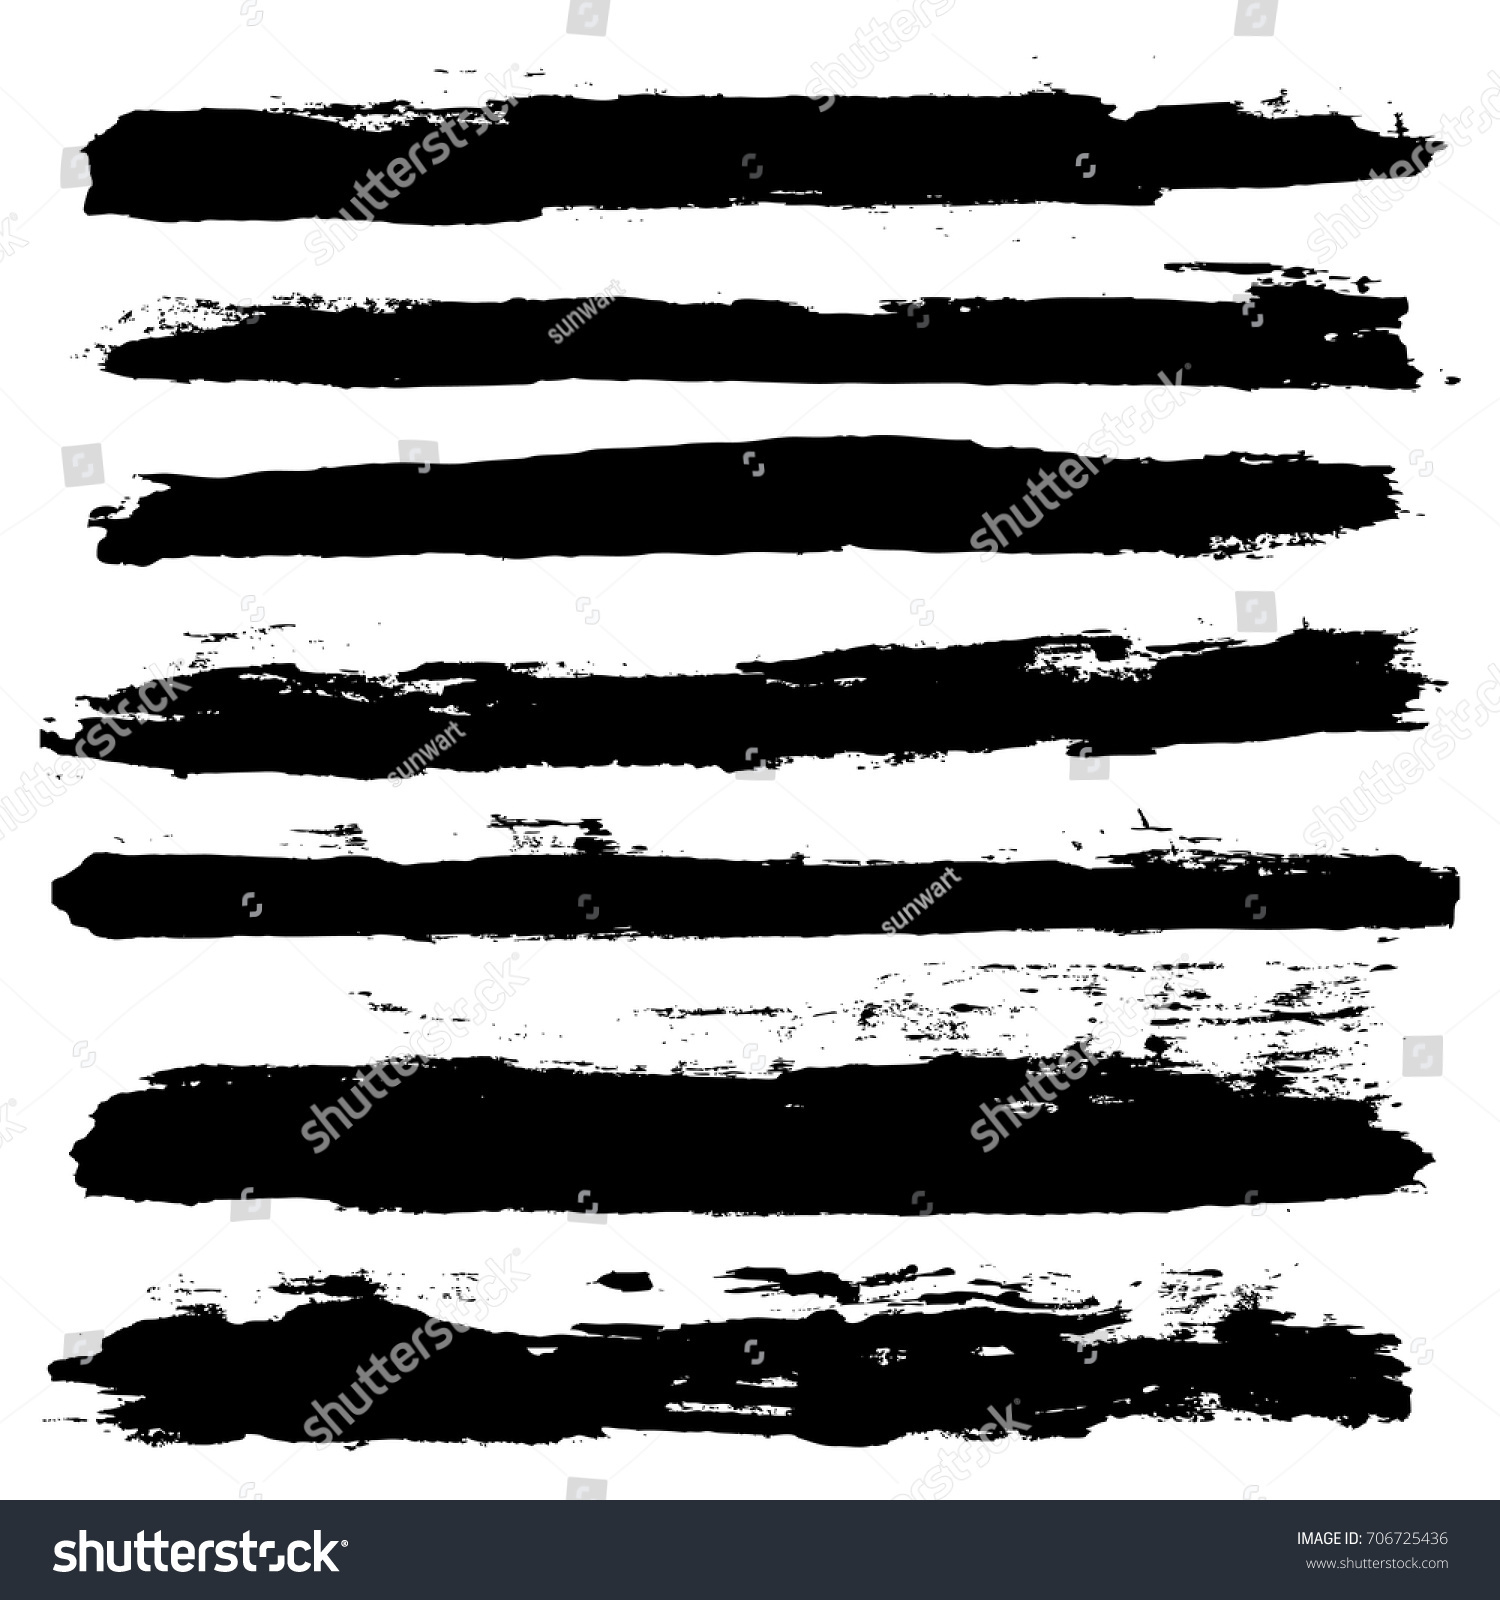 black brush strokes set backgrounds. Artistic  lines grunge collection. Set of black grungy hand painted brush strokes isolated on white. Abstract ink texture, design elements. #706725436